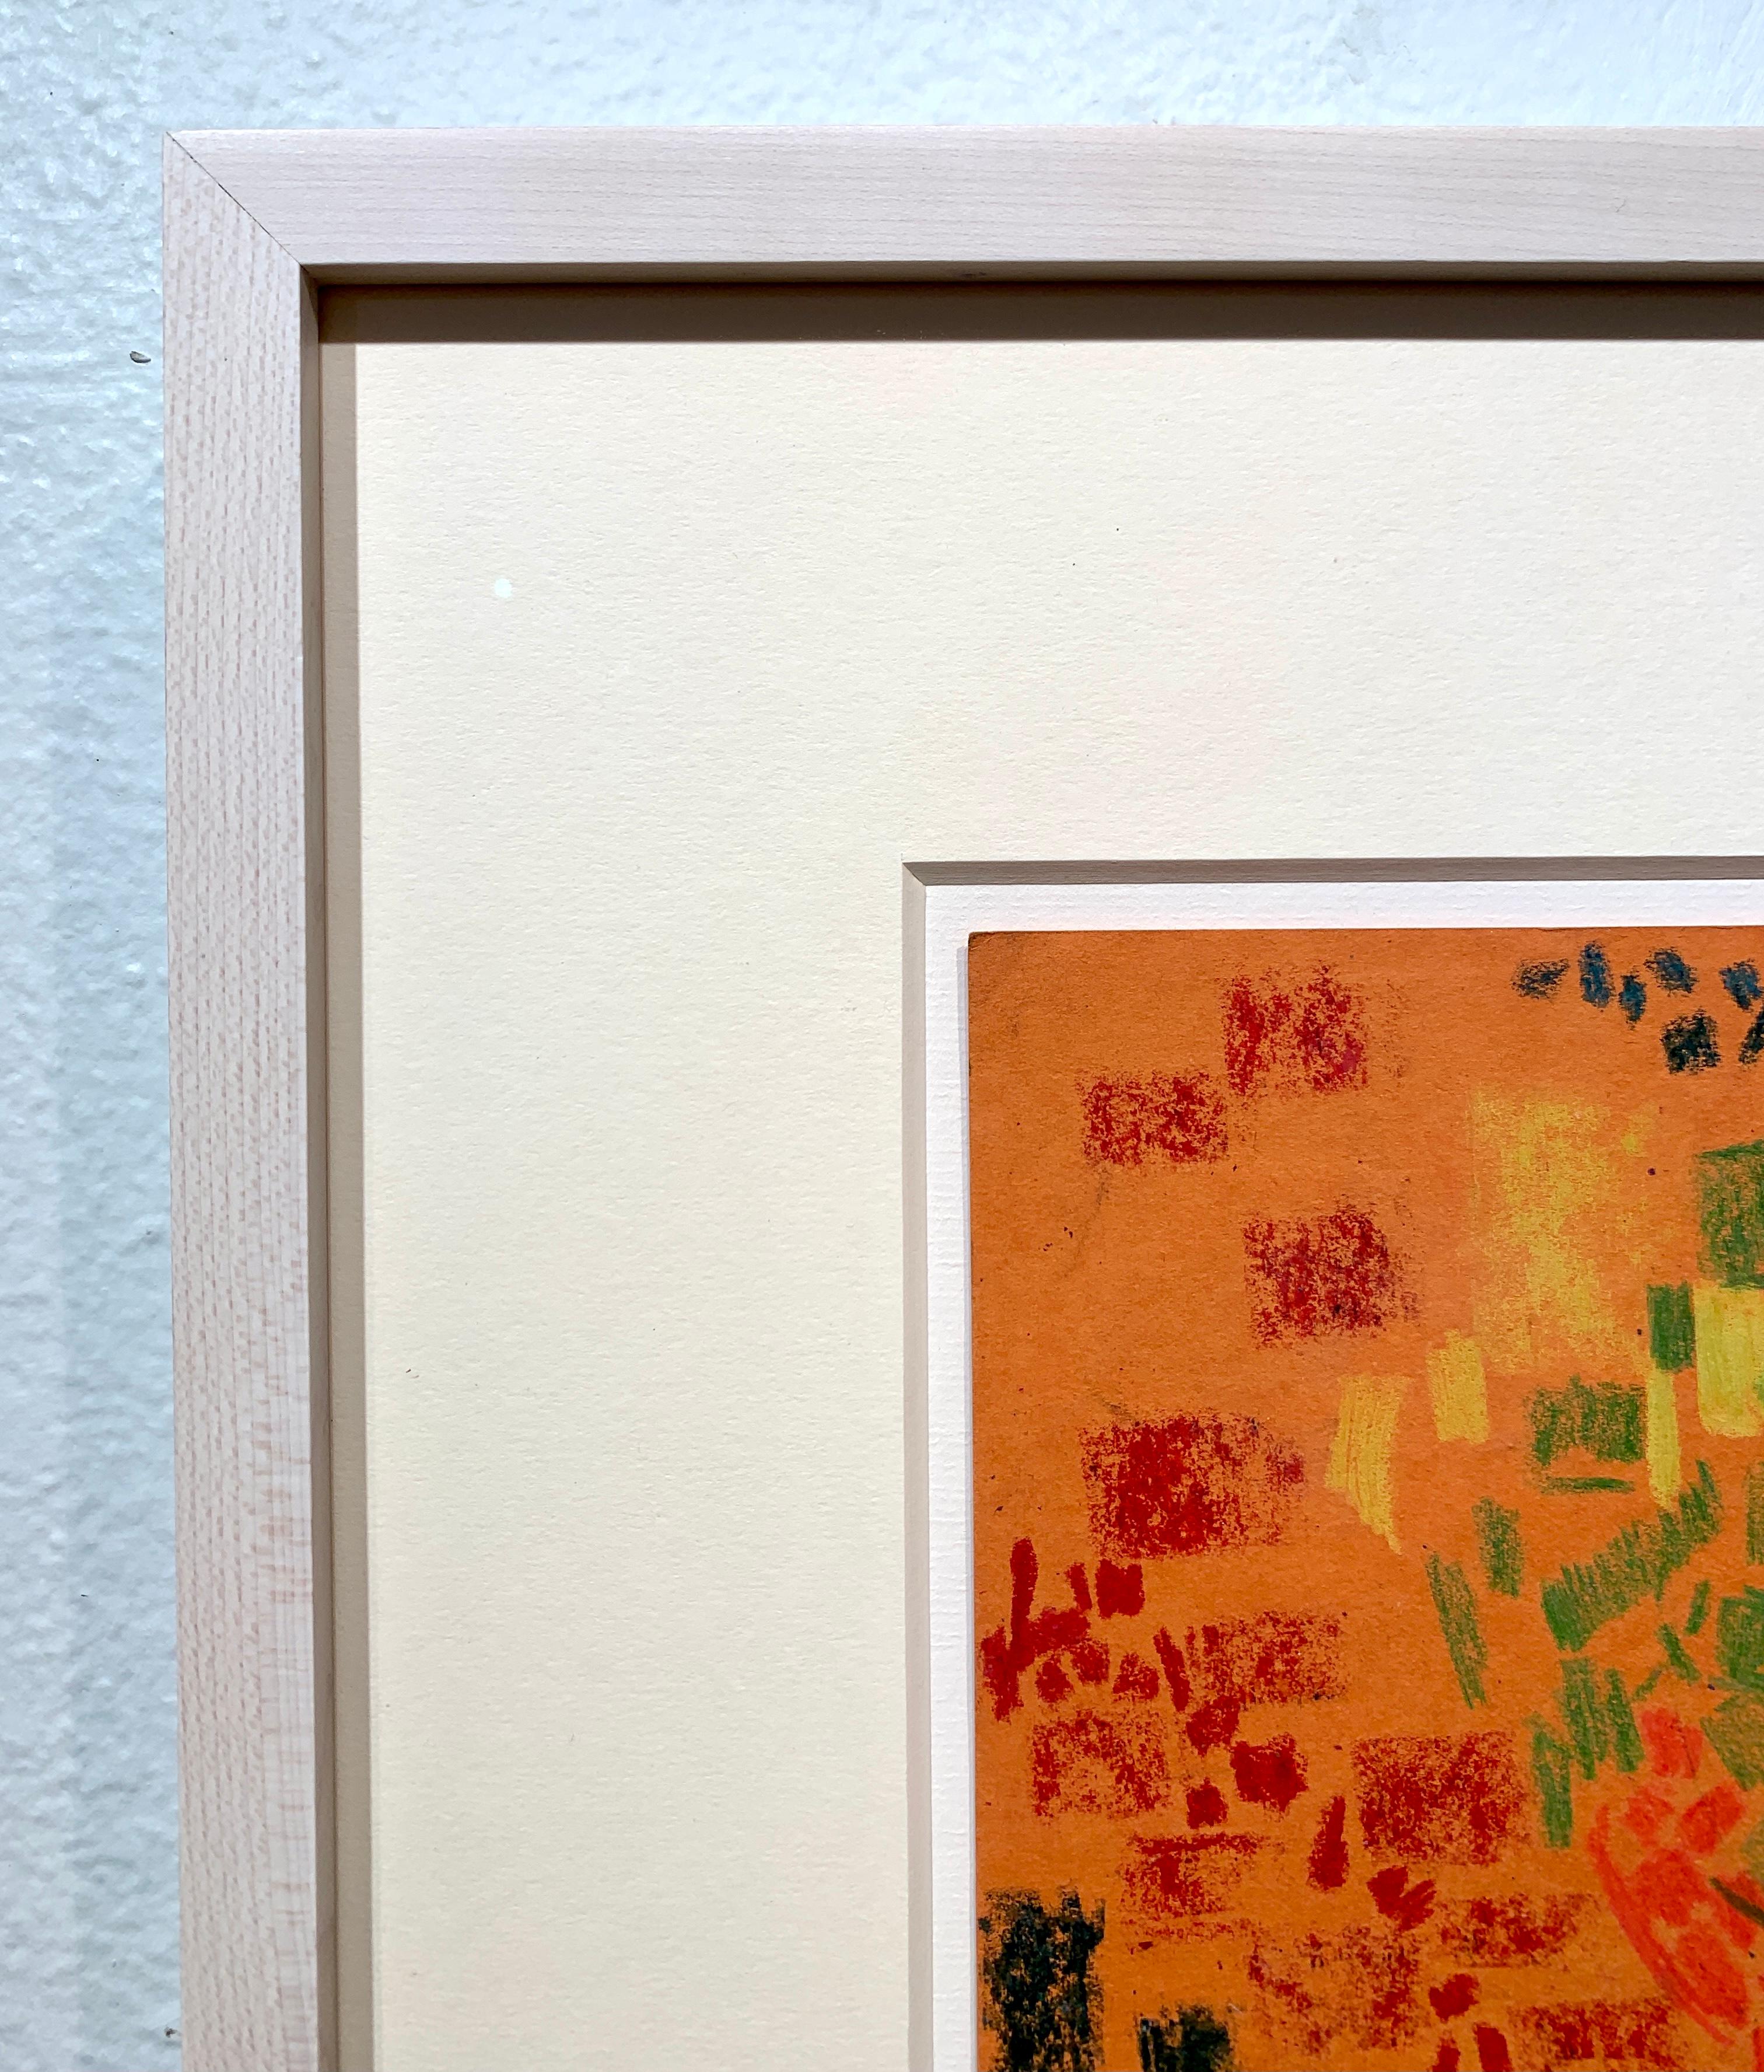 Untitled (Orange) 1959, by Lynne Mapp Drexler Mid-Century Abstract Expressionist on Paper

Provenance:  Drexler Estate

LYNNE MAPP DREXLER (American, 1928-1999)

Southern-born Lynne Mapp Drexler found her artistic voice during one of the most